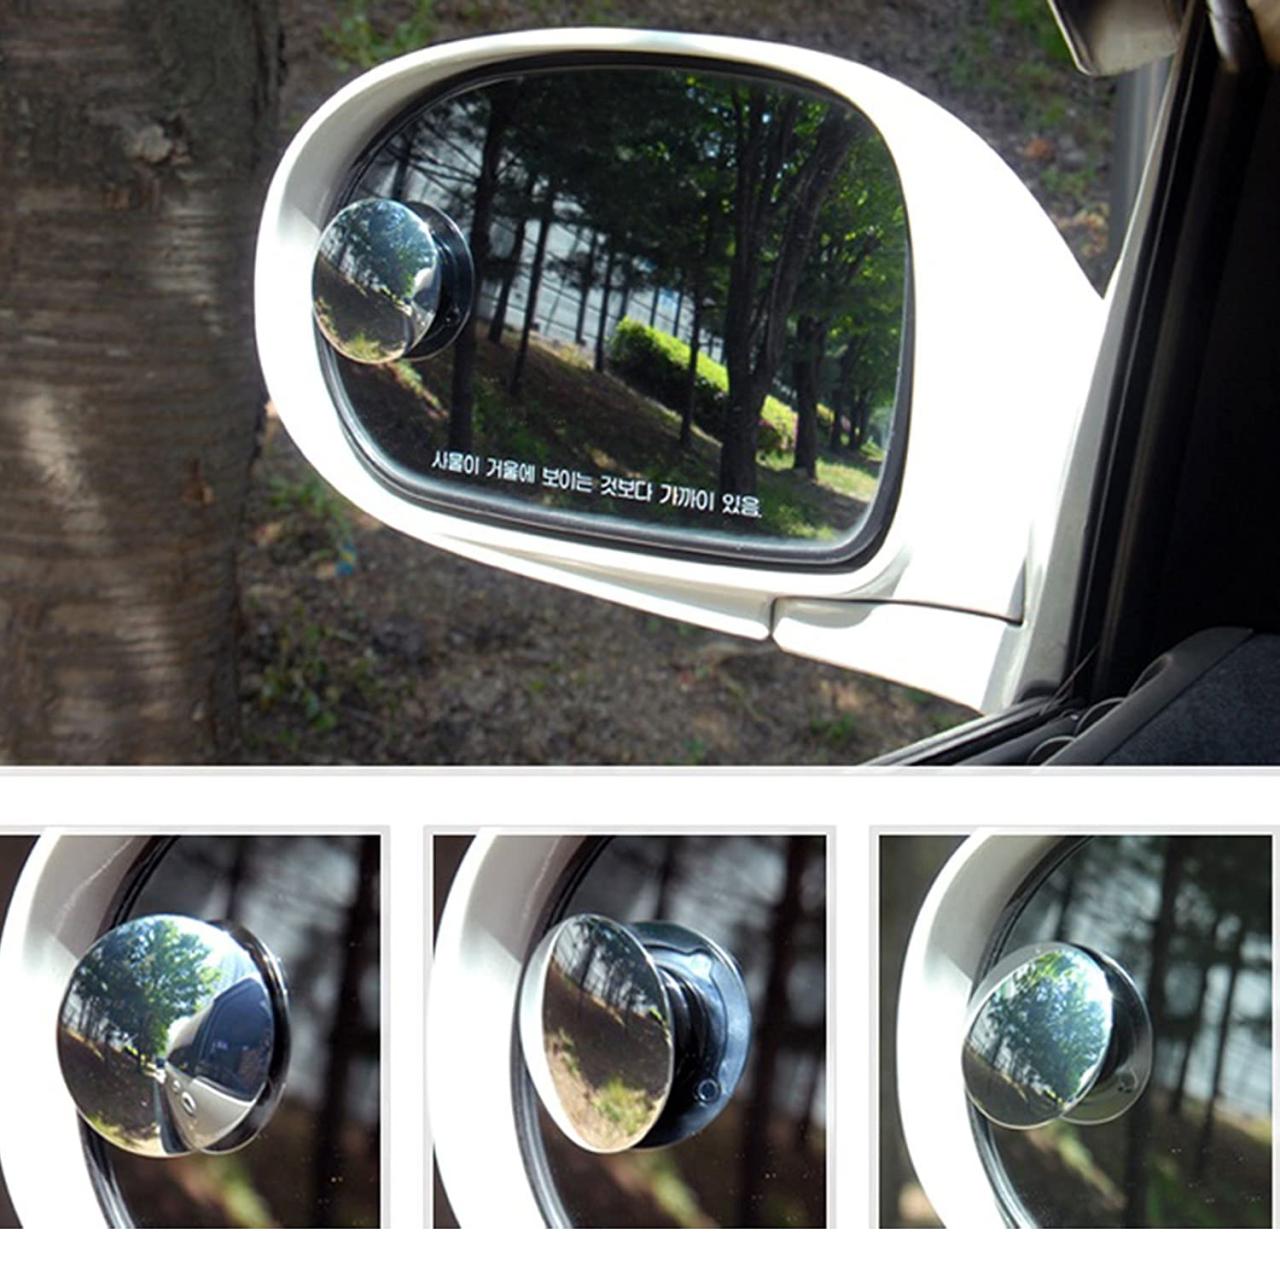 Cardeco Moving Slim Circle Blind Spot Mirror SL Lens 50.8mm 2-pc Set For  All Universal Vehicles Car Fit Car Parts Car Styling & Body Fittings